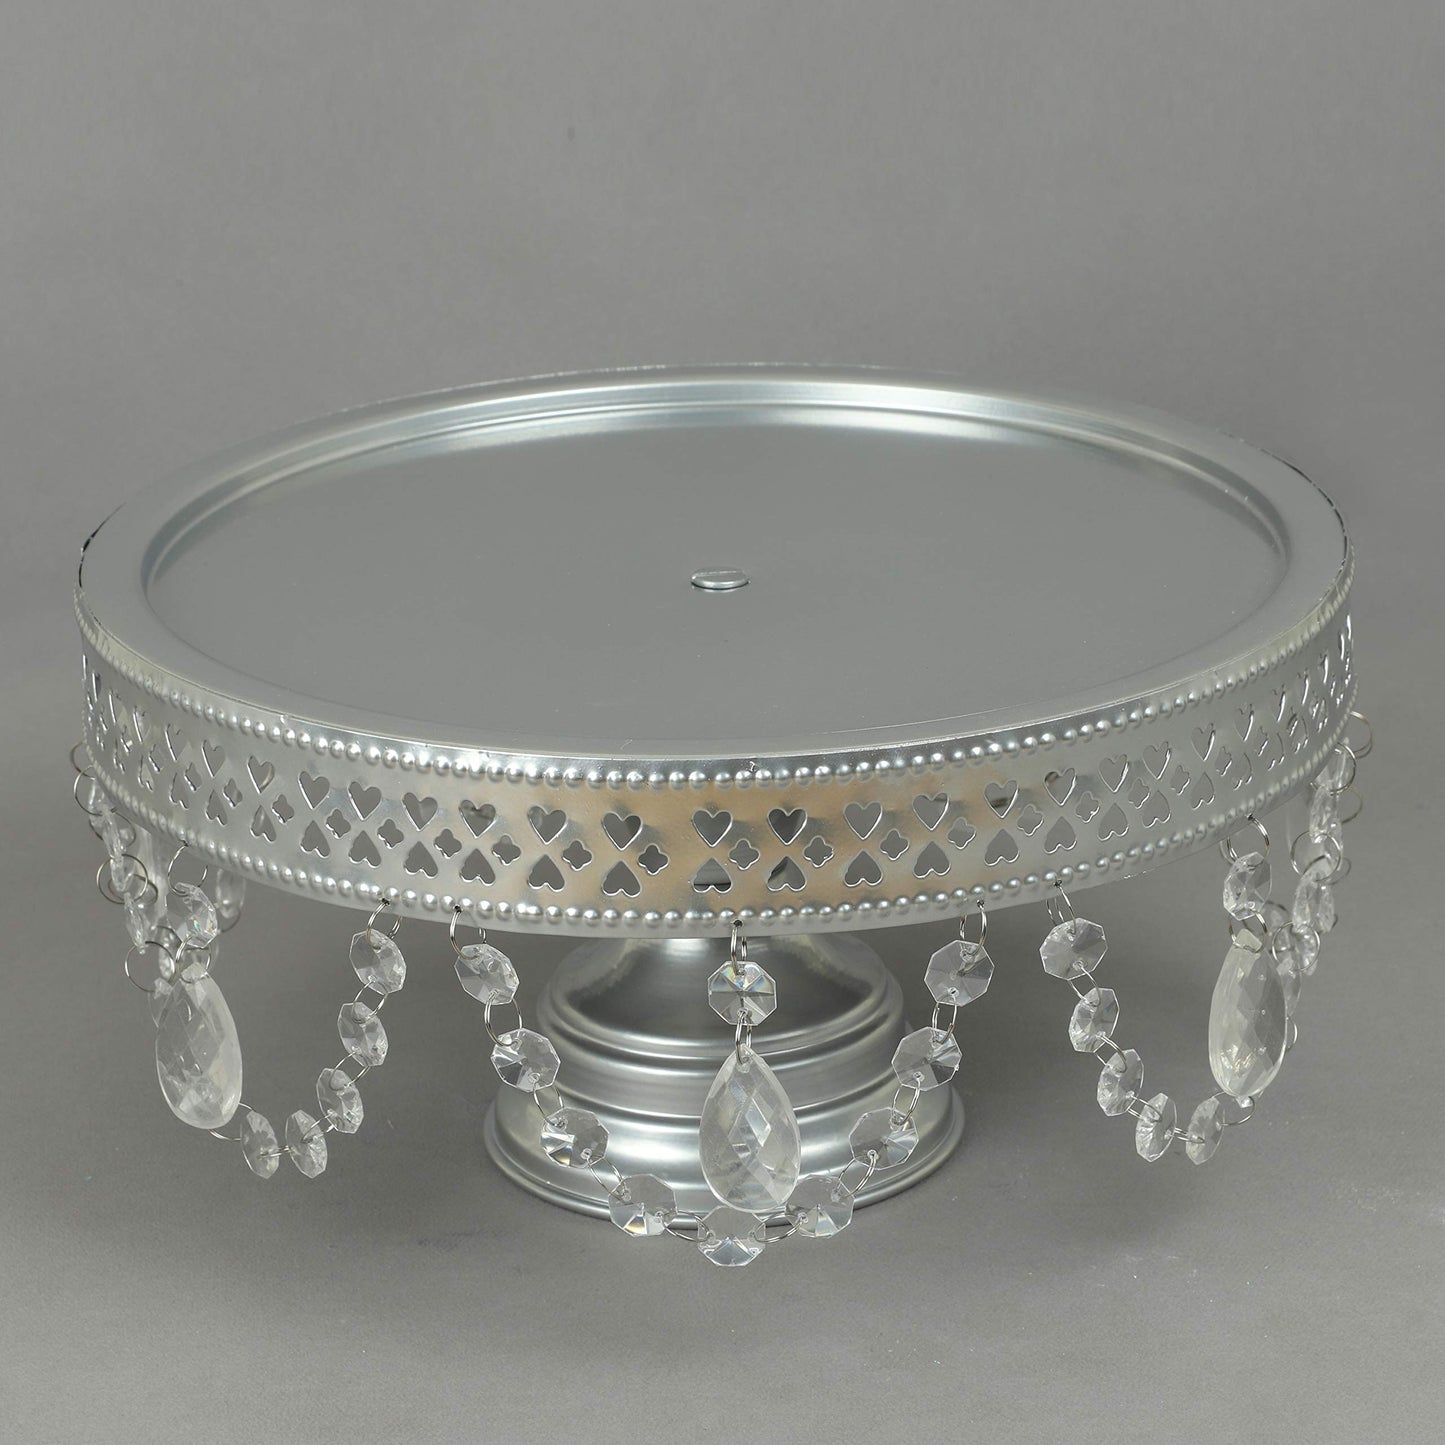 GiftBay Creations Cake Stand Pedestal 13" Diameter (Top), Strong Metal with Clear Hanging Crystals (Silver)